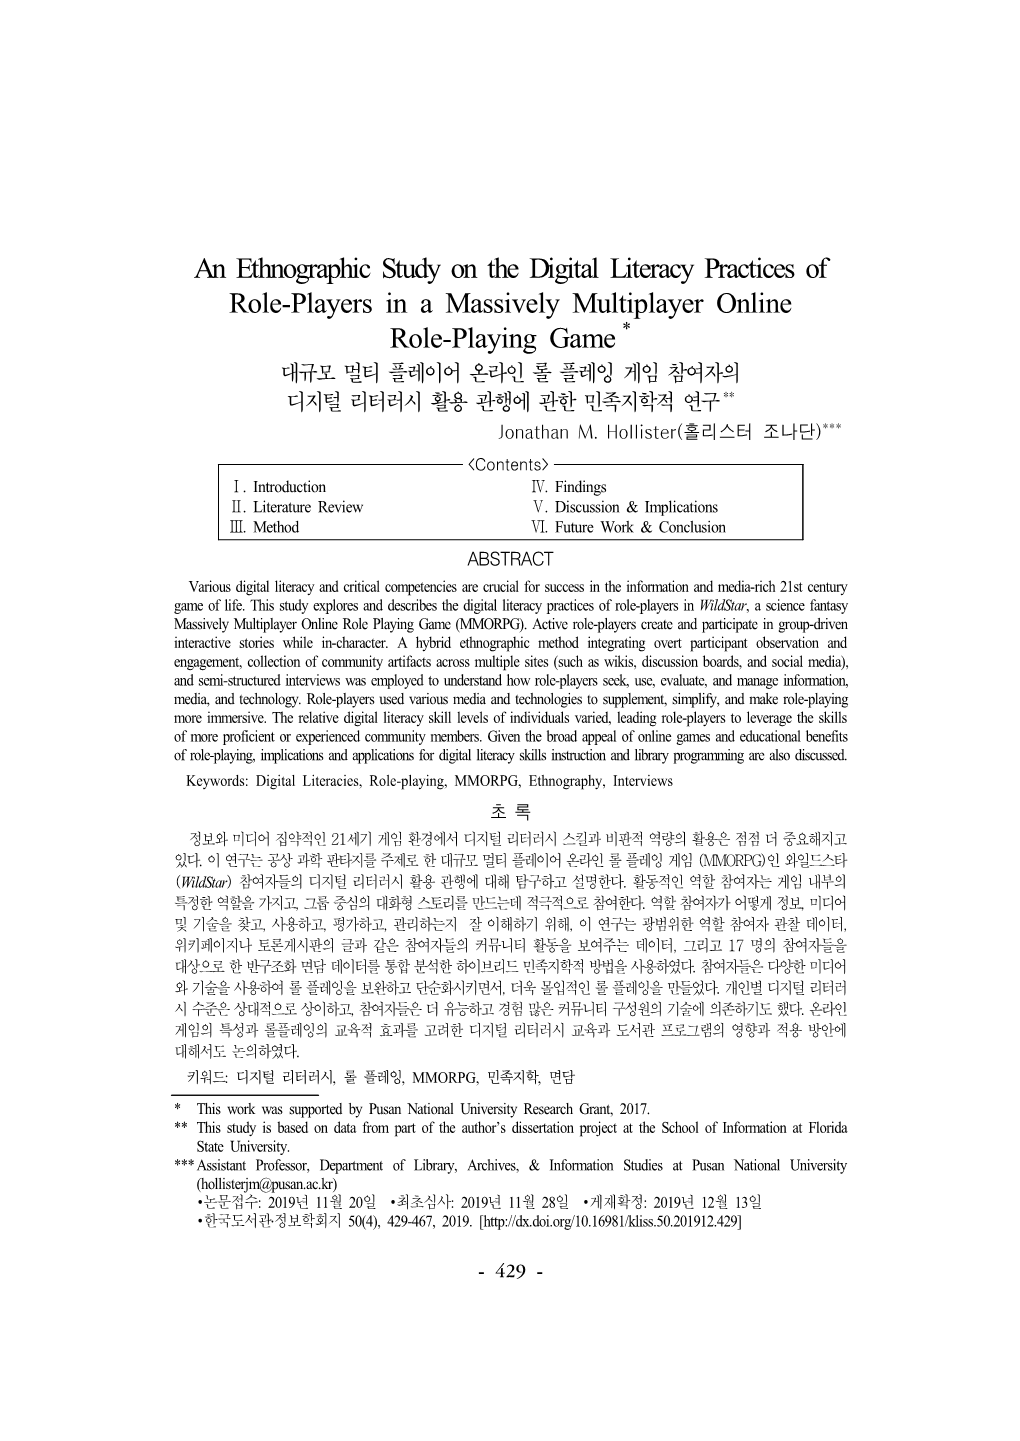 An Ethnographic Study on the Digital Literacy Practices of Role-Players